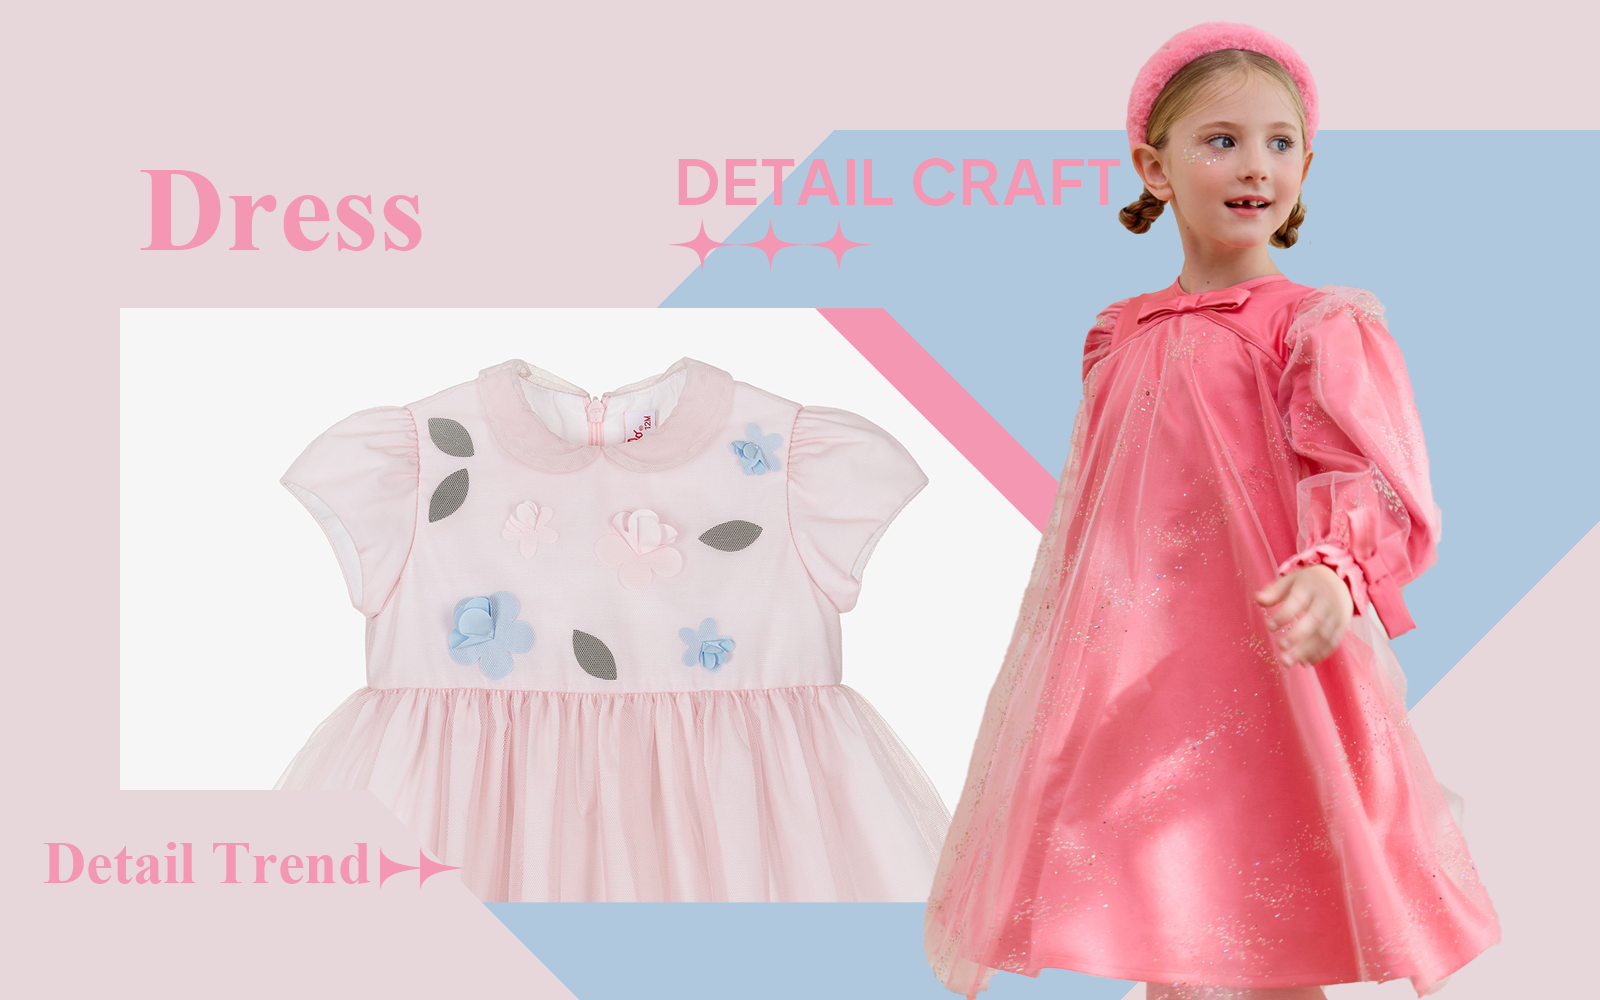 Dress -- The Detail & Craft Trend for Kidswear